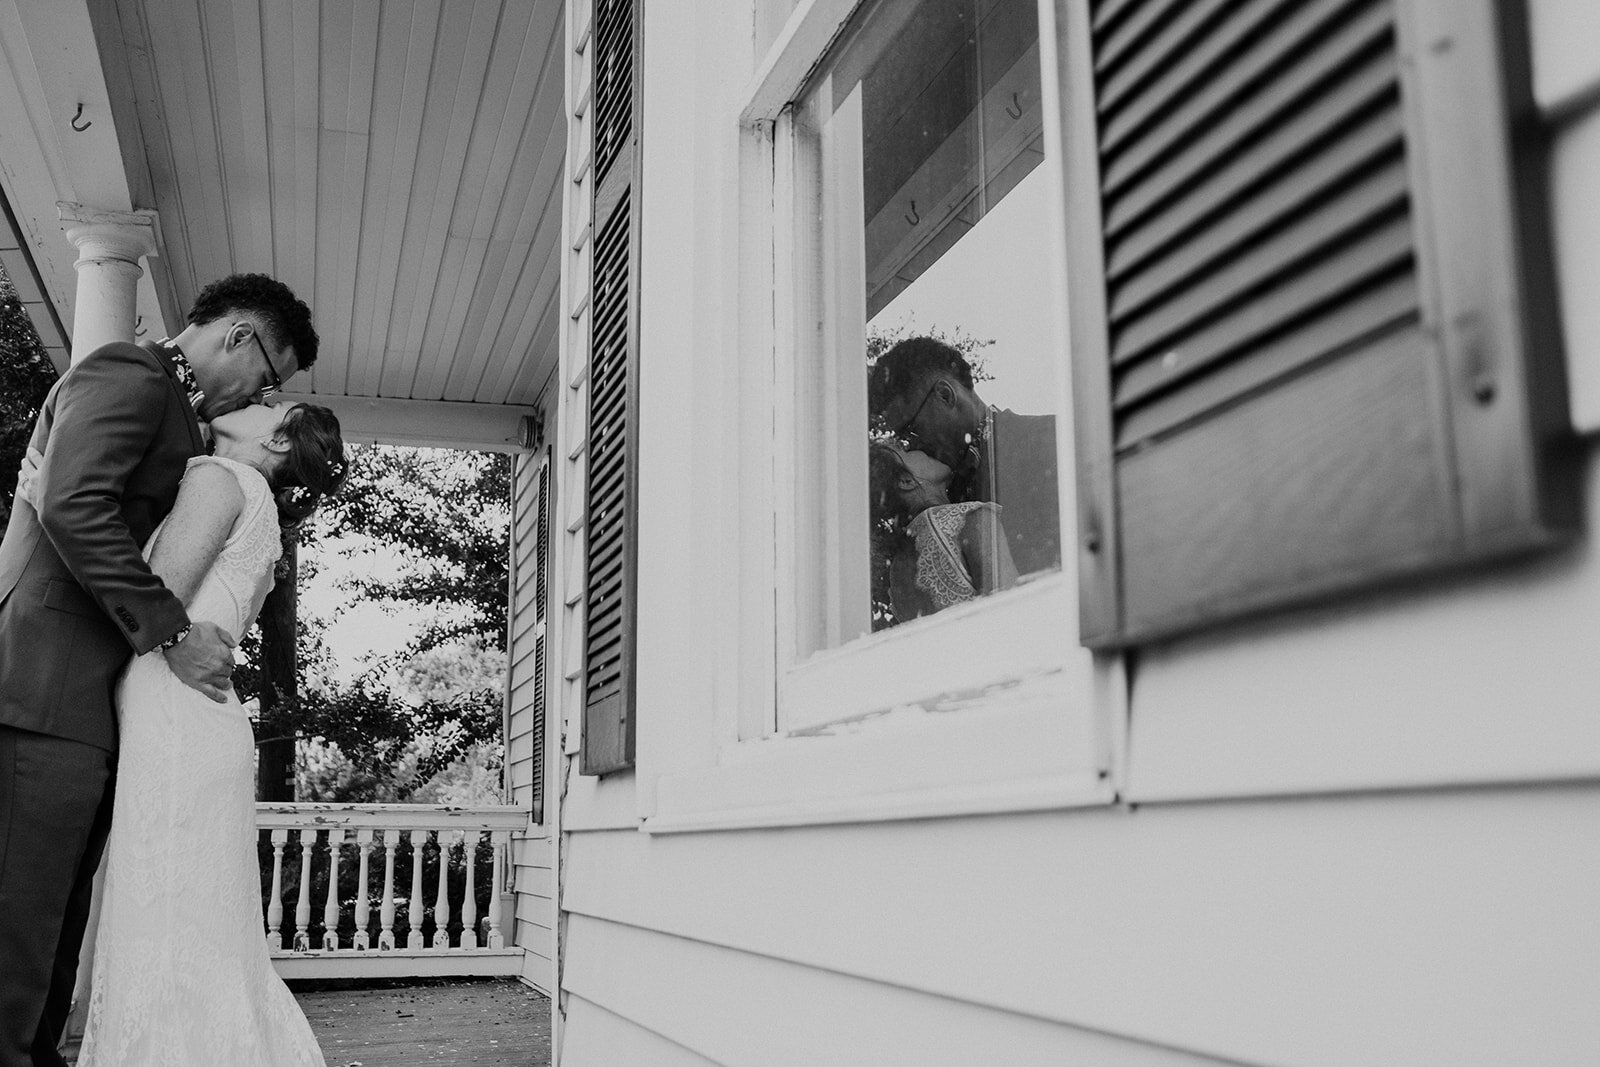 A bride and groom's image is reflected in a porch window while they kiss. 